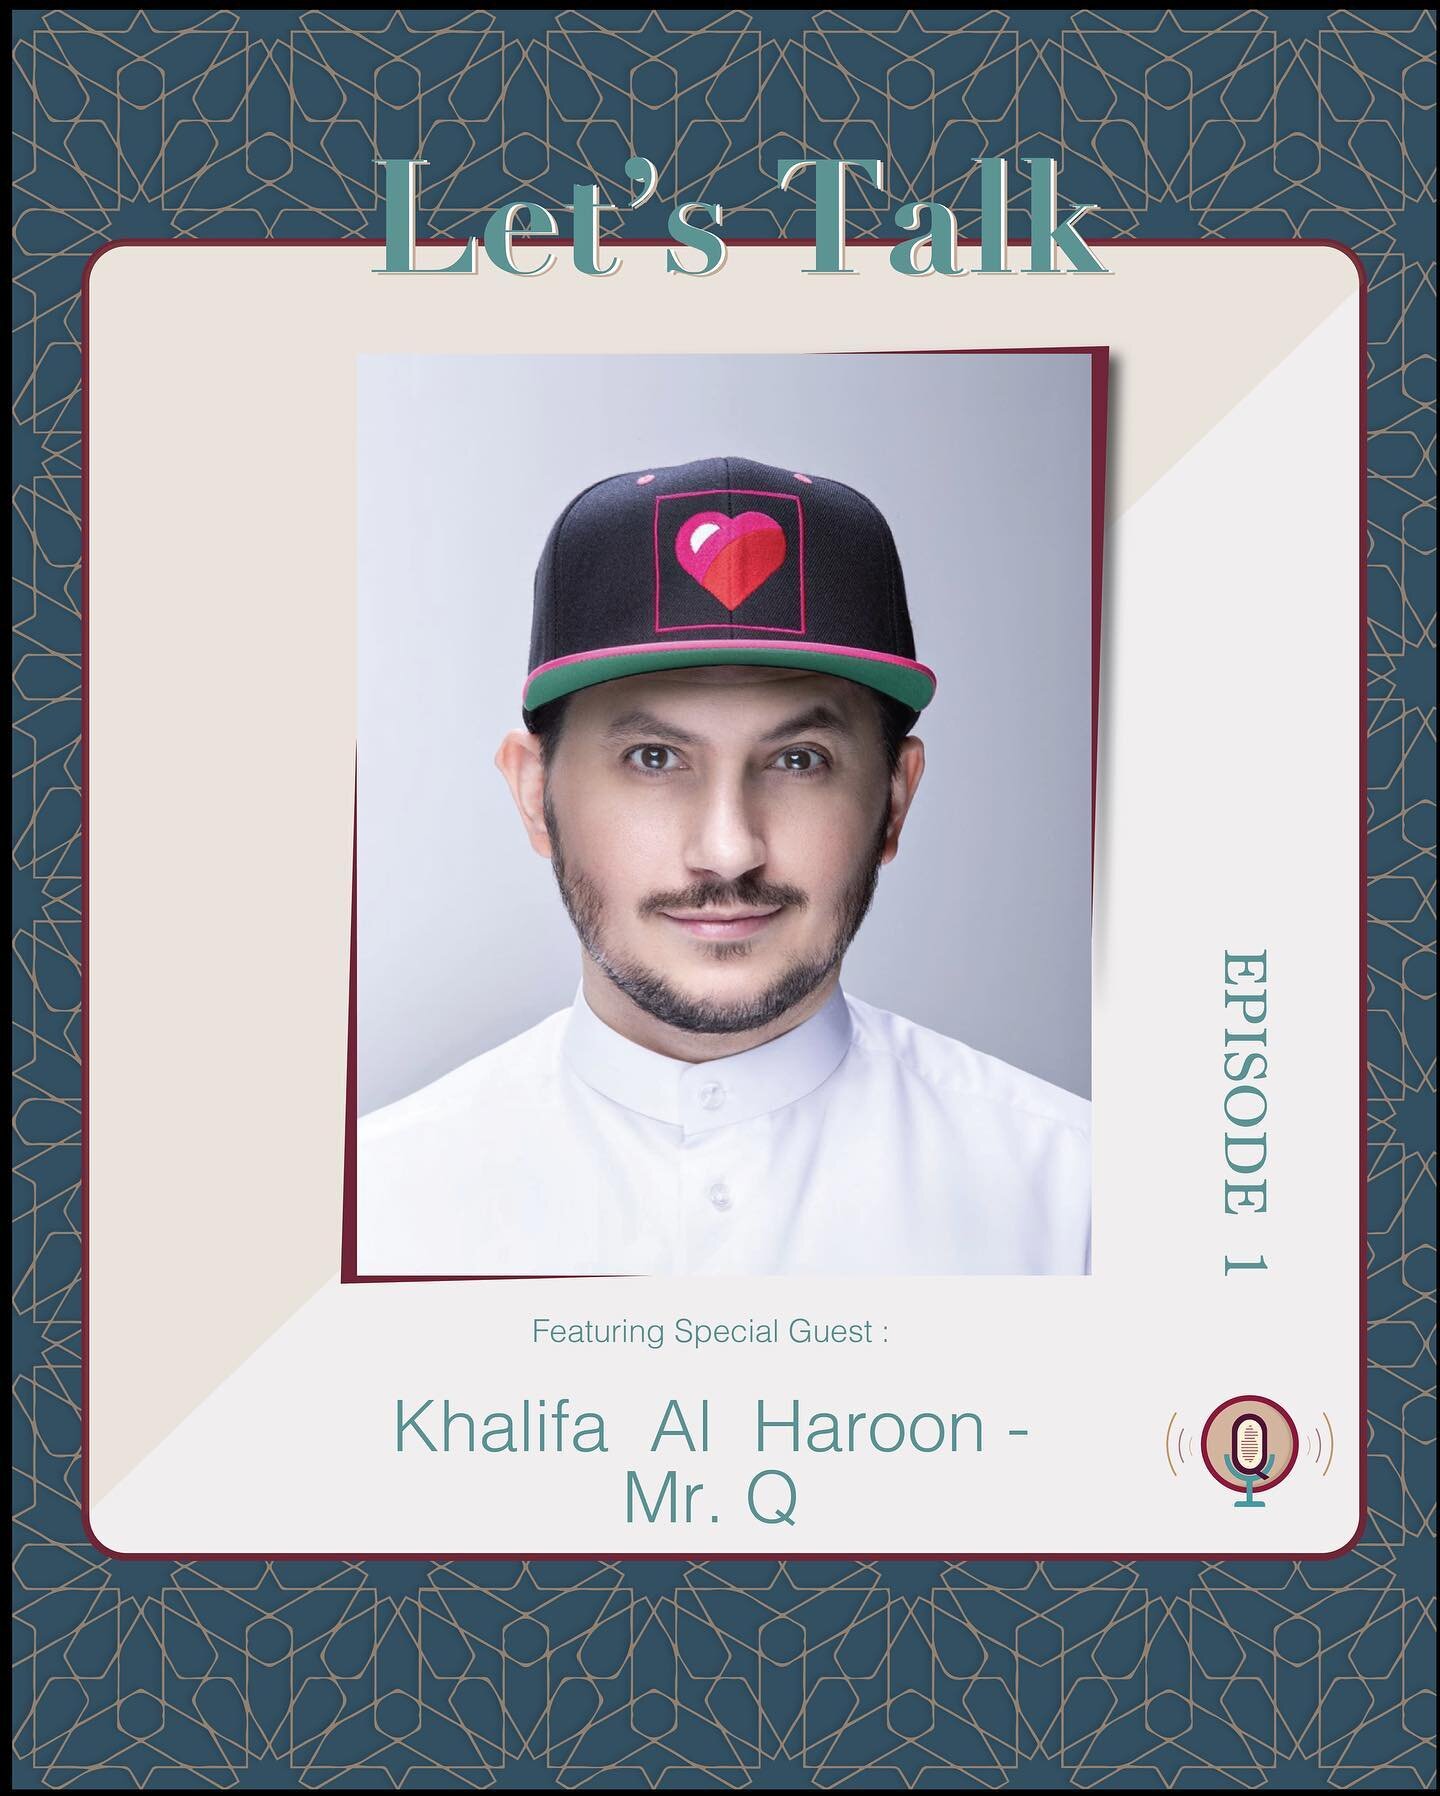 Happy Wednesday everyone! 
We would love to introduce our very first and very special guest Khalifa Al Harron - @iloveqatar ☺️
Stayed tuned for the full episode 👌🏻

#podcast #poscasting #podcastlife #podcaster #podcastersofinstagram #music #instago